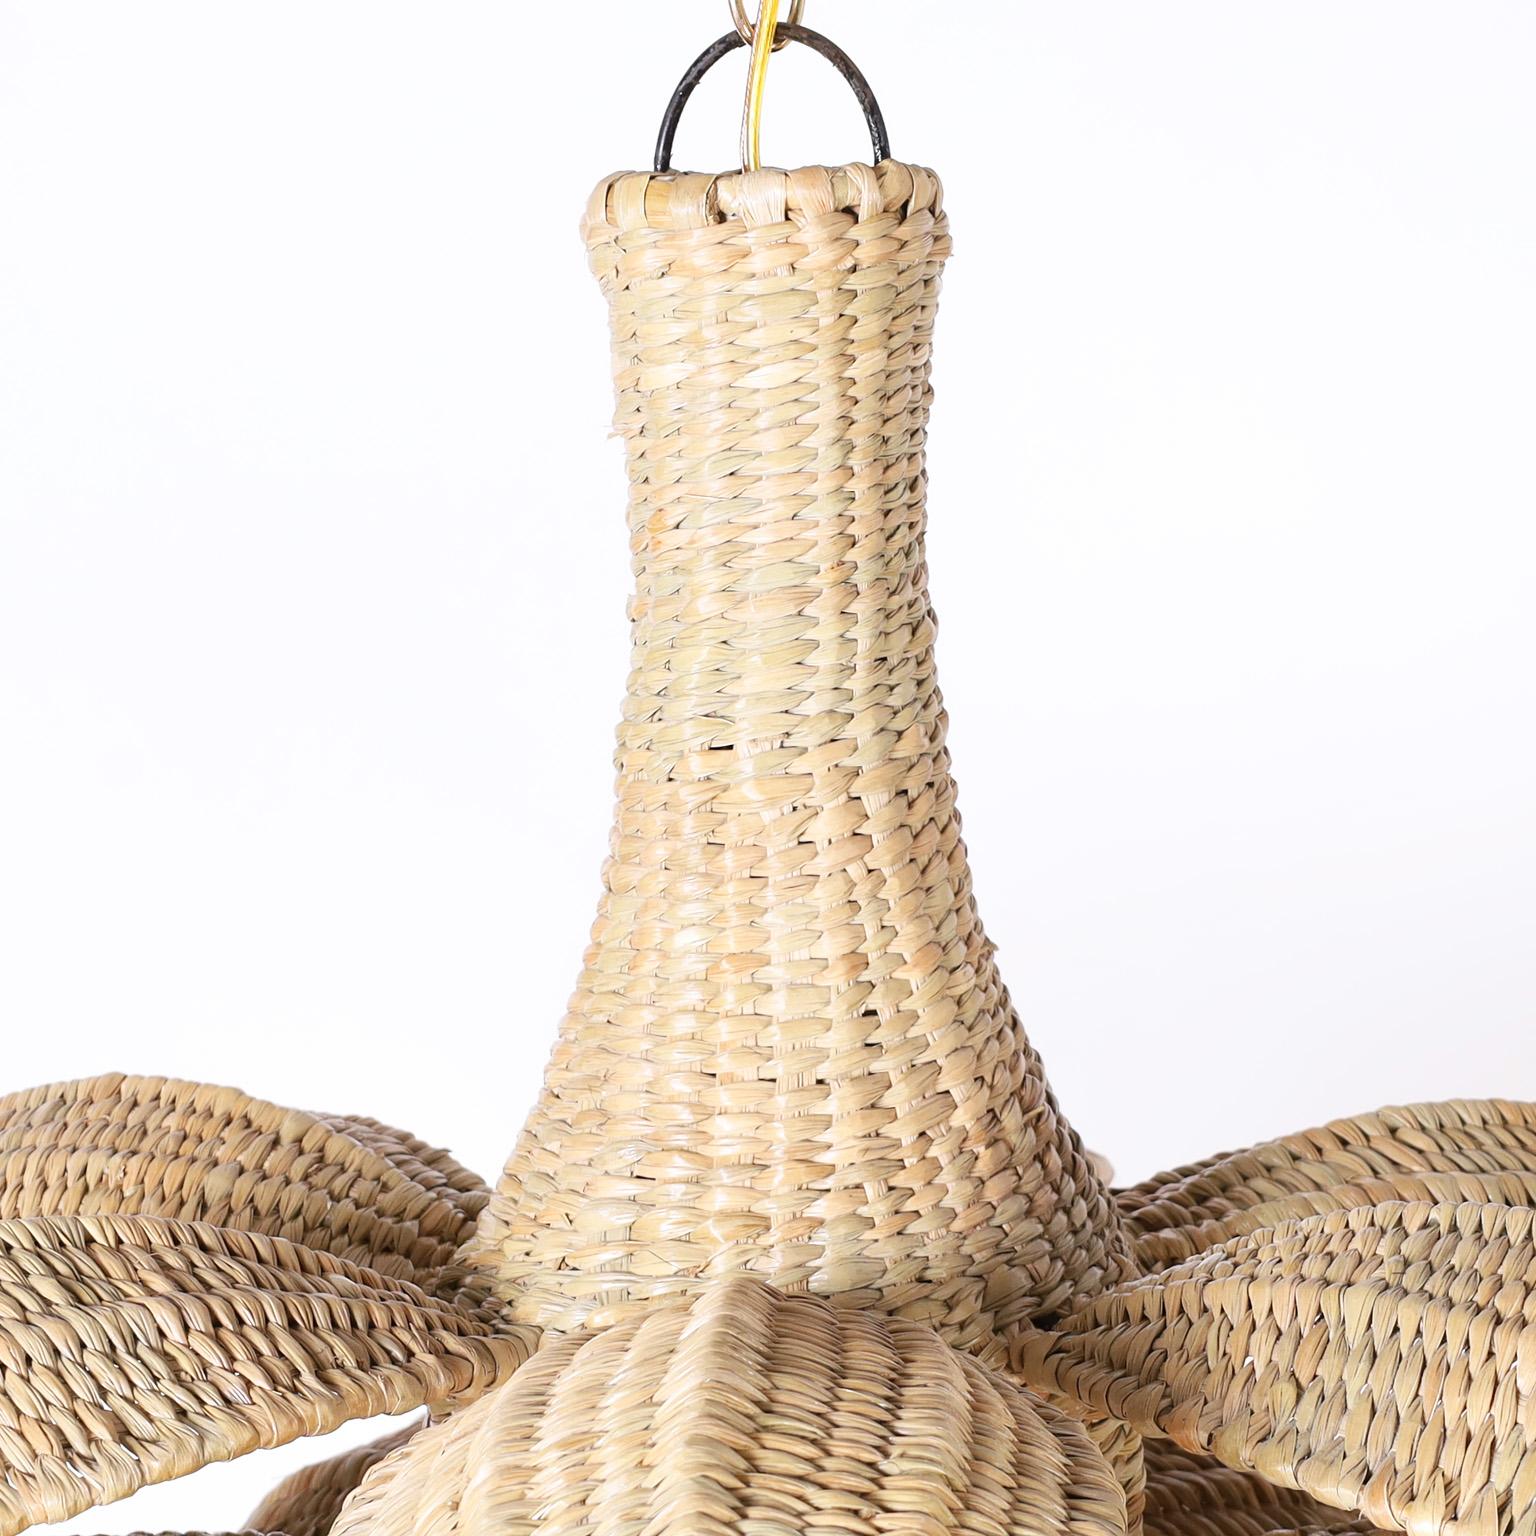 The Sanibel, a chic wicker palm leaf or lotus pendant light fixture crafted in reed expertly woven over a sturdy metal frame with three tiers of palm leaves, exclusively designed and offered by F.S. Henemader antiques as part of the FS Flores